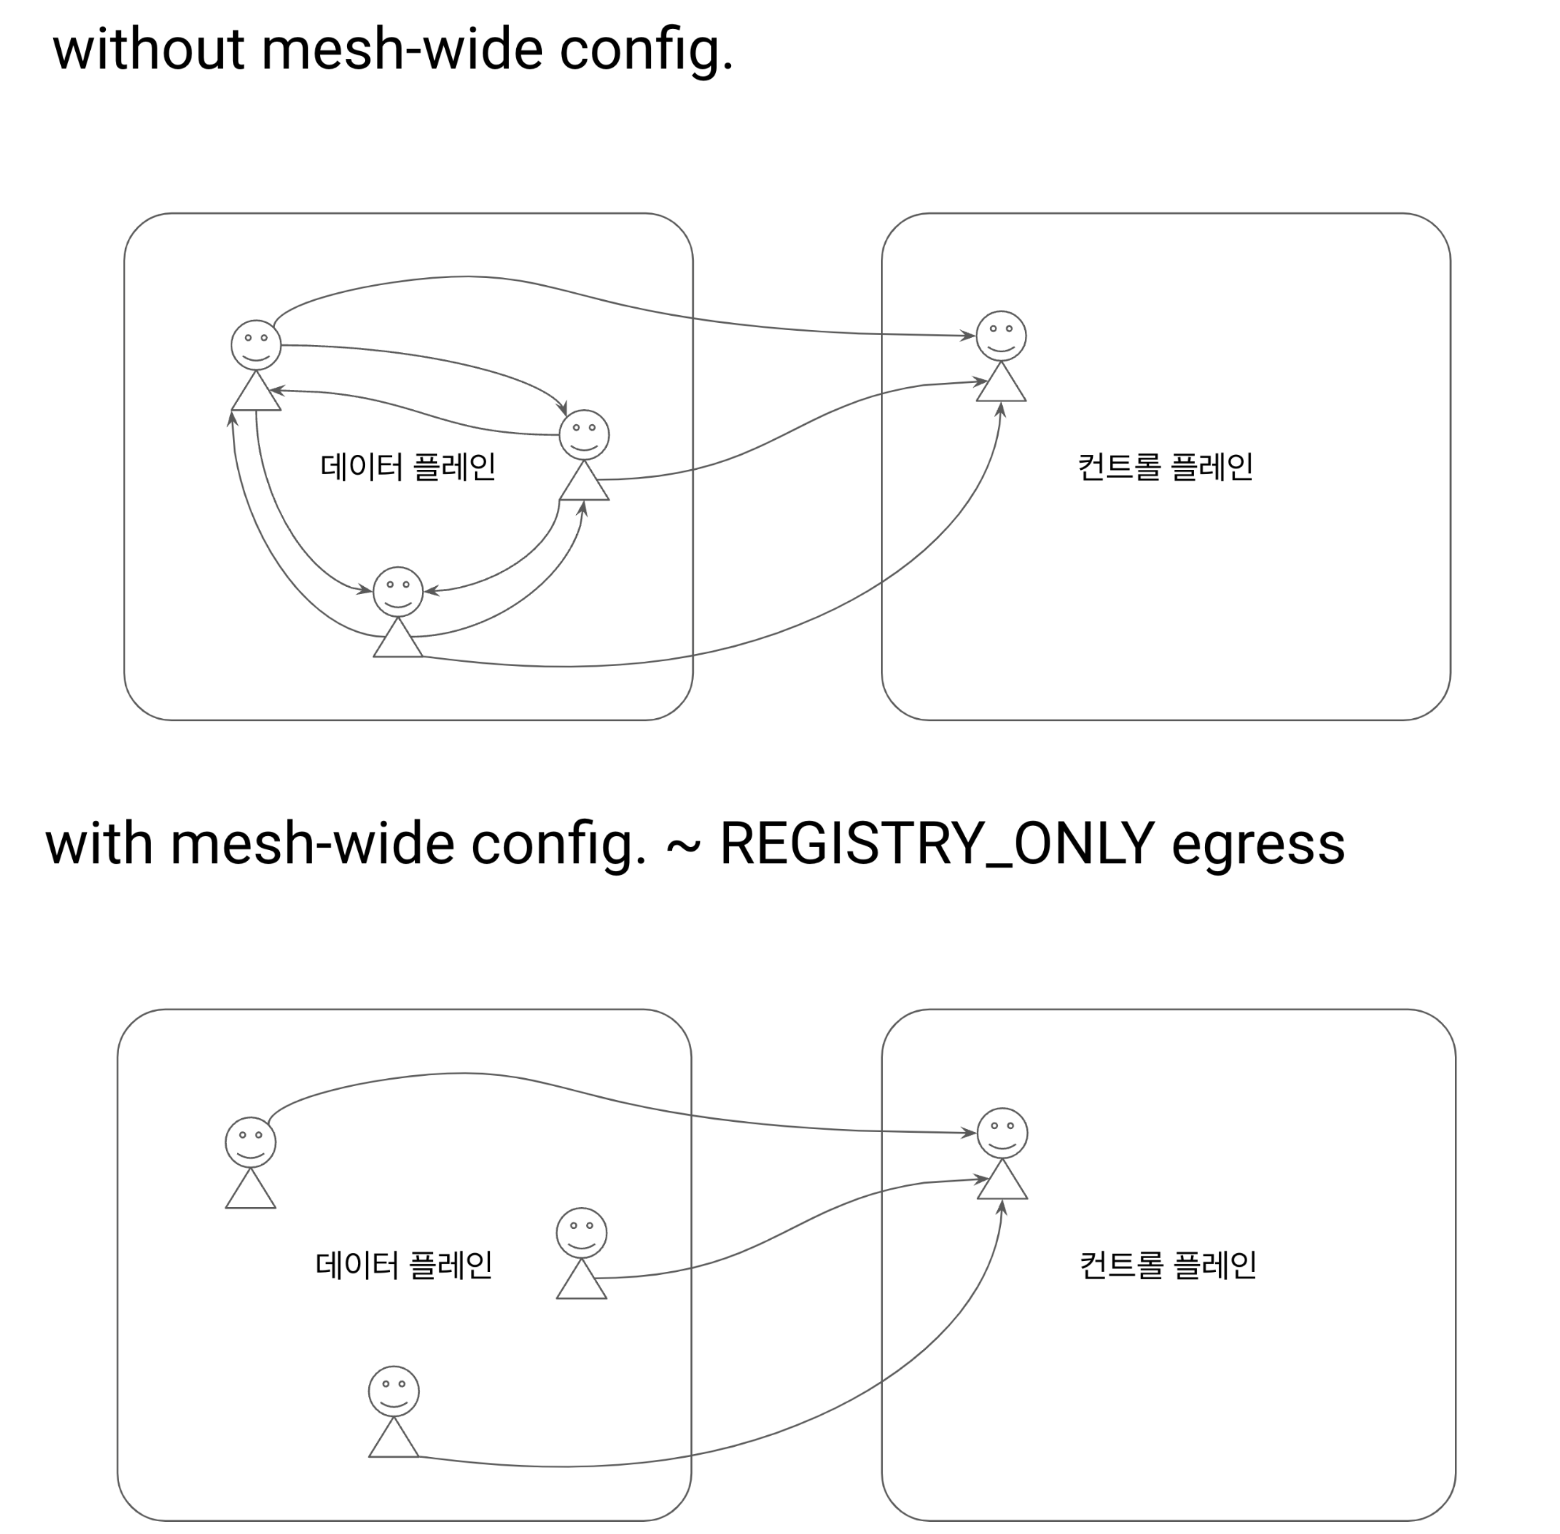 ch11-istio-mesh-wide-config.png